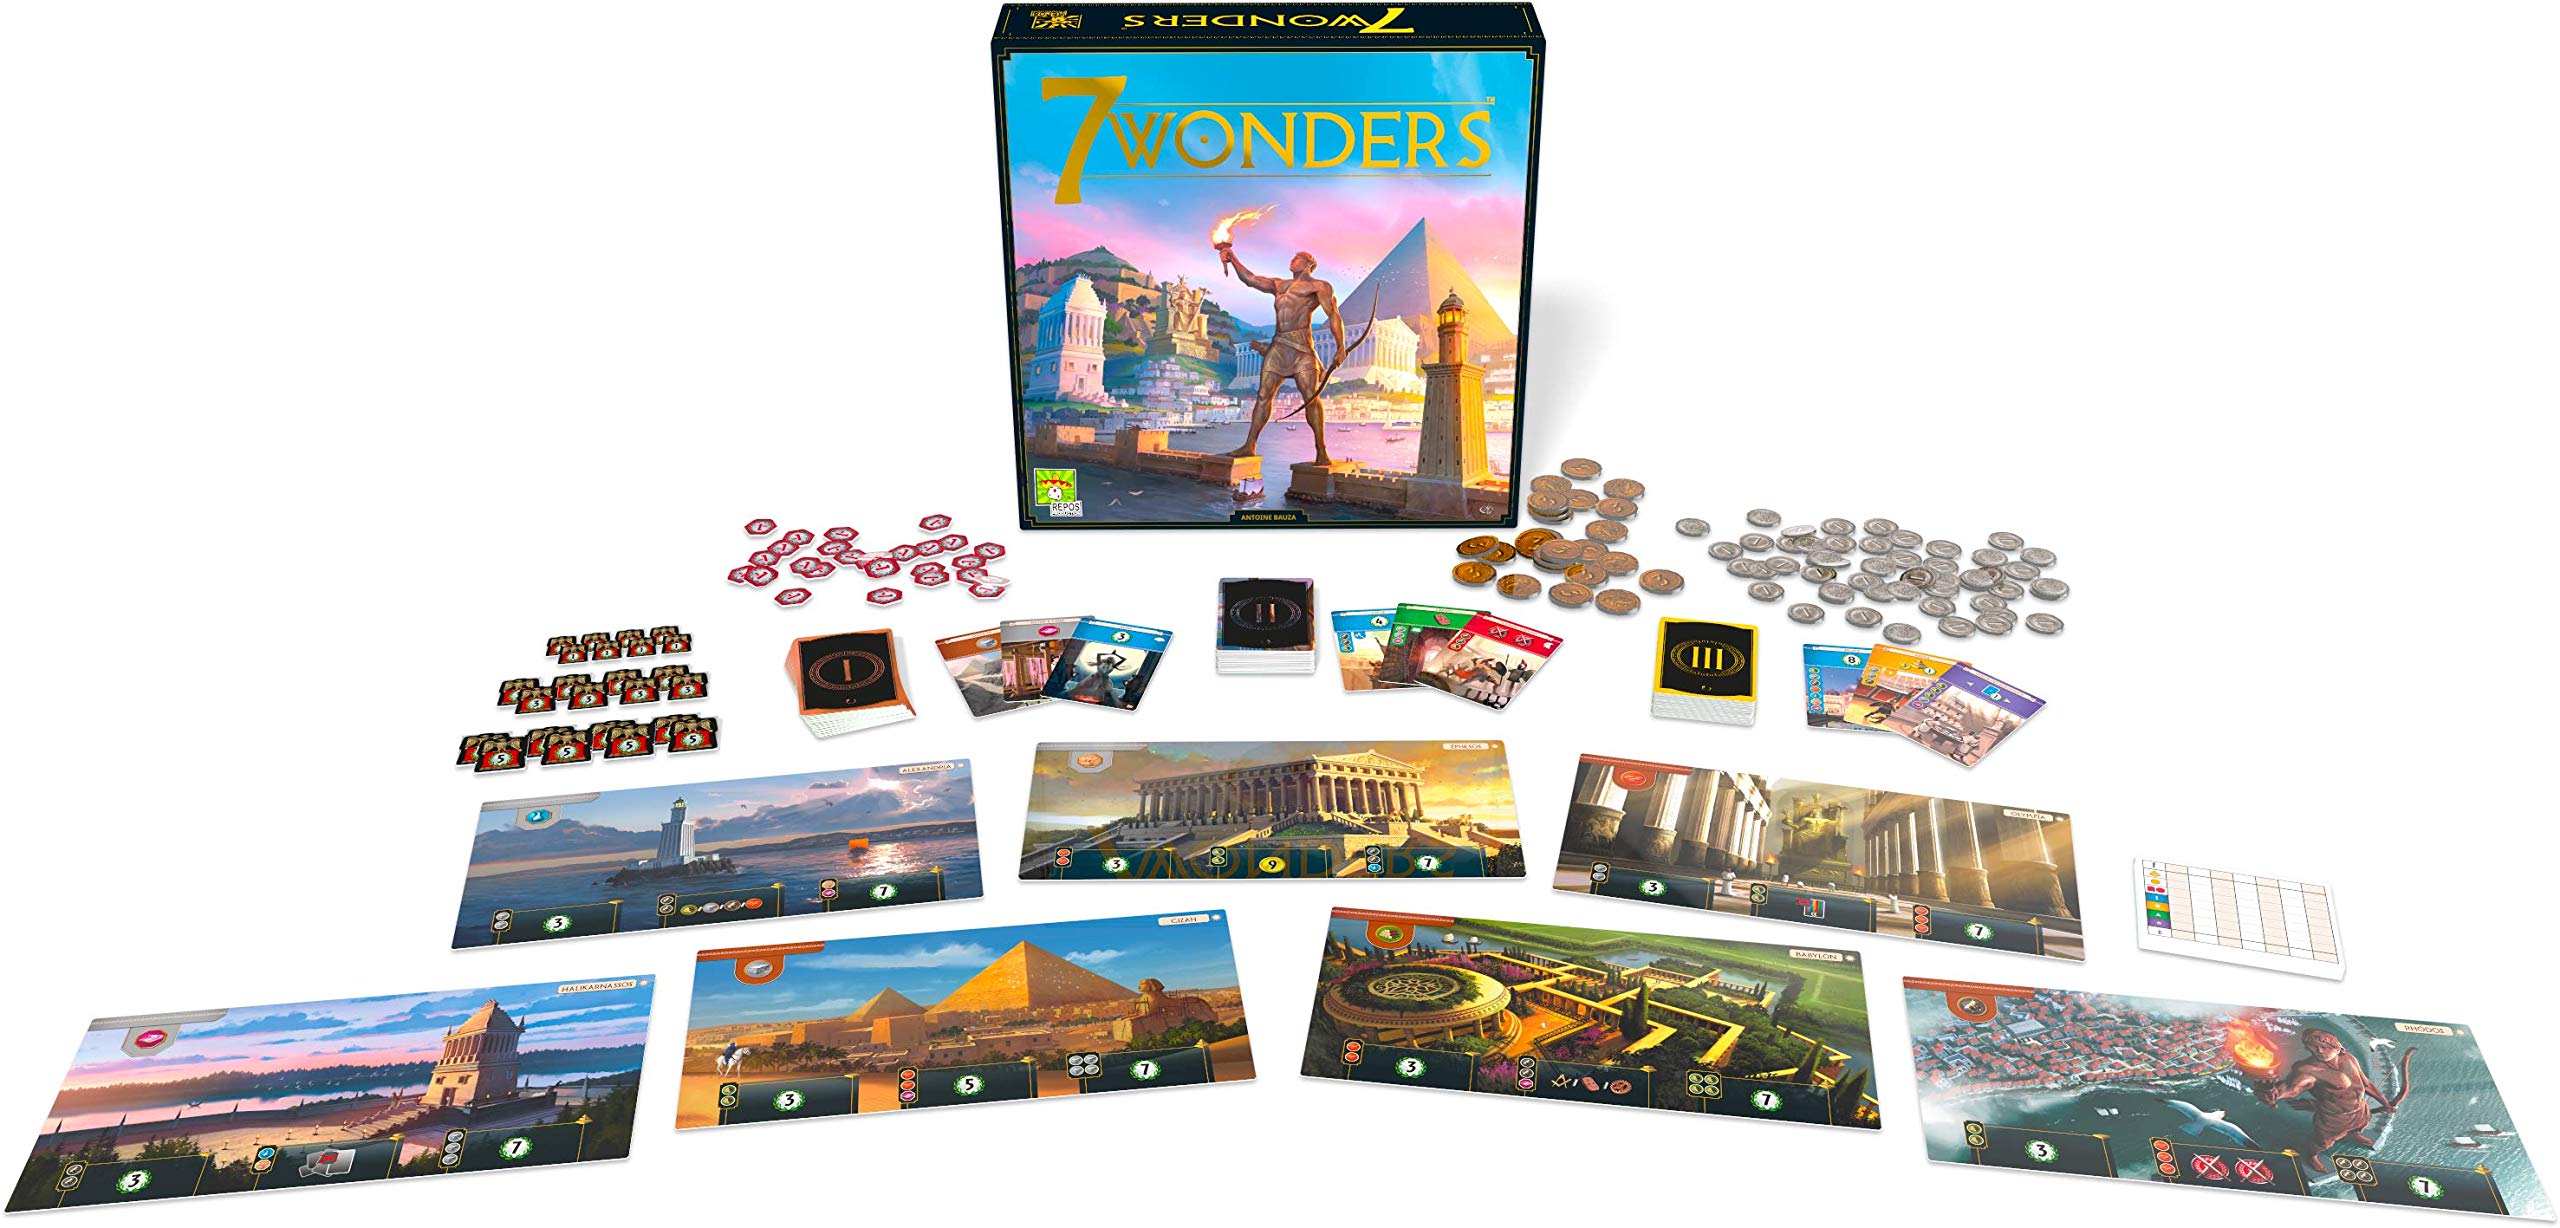 7 Wonders Board Game BASE GAME (New Edition) | Family Board Game | Civilization Board Game for Adults | Strategy Board Game for Game Night | 3-7 Players | Ages 10+ | Made by Repos Production